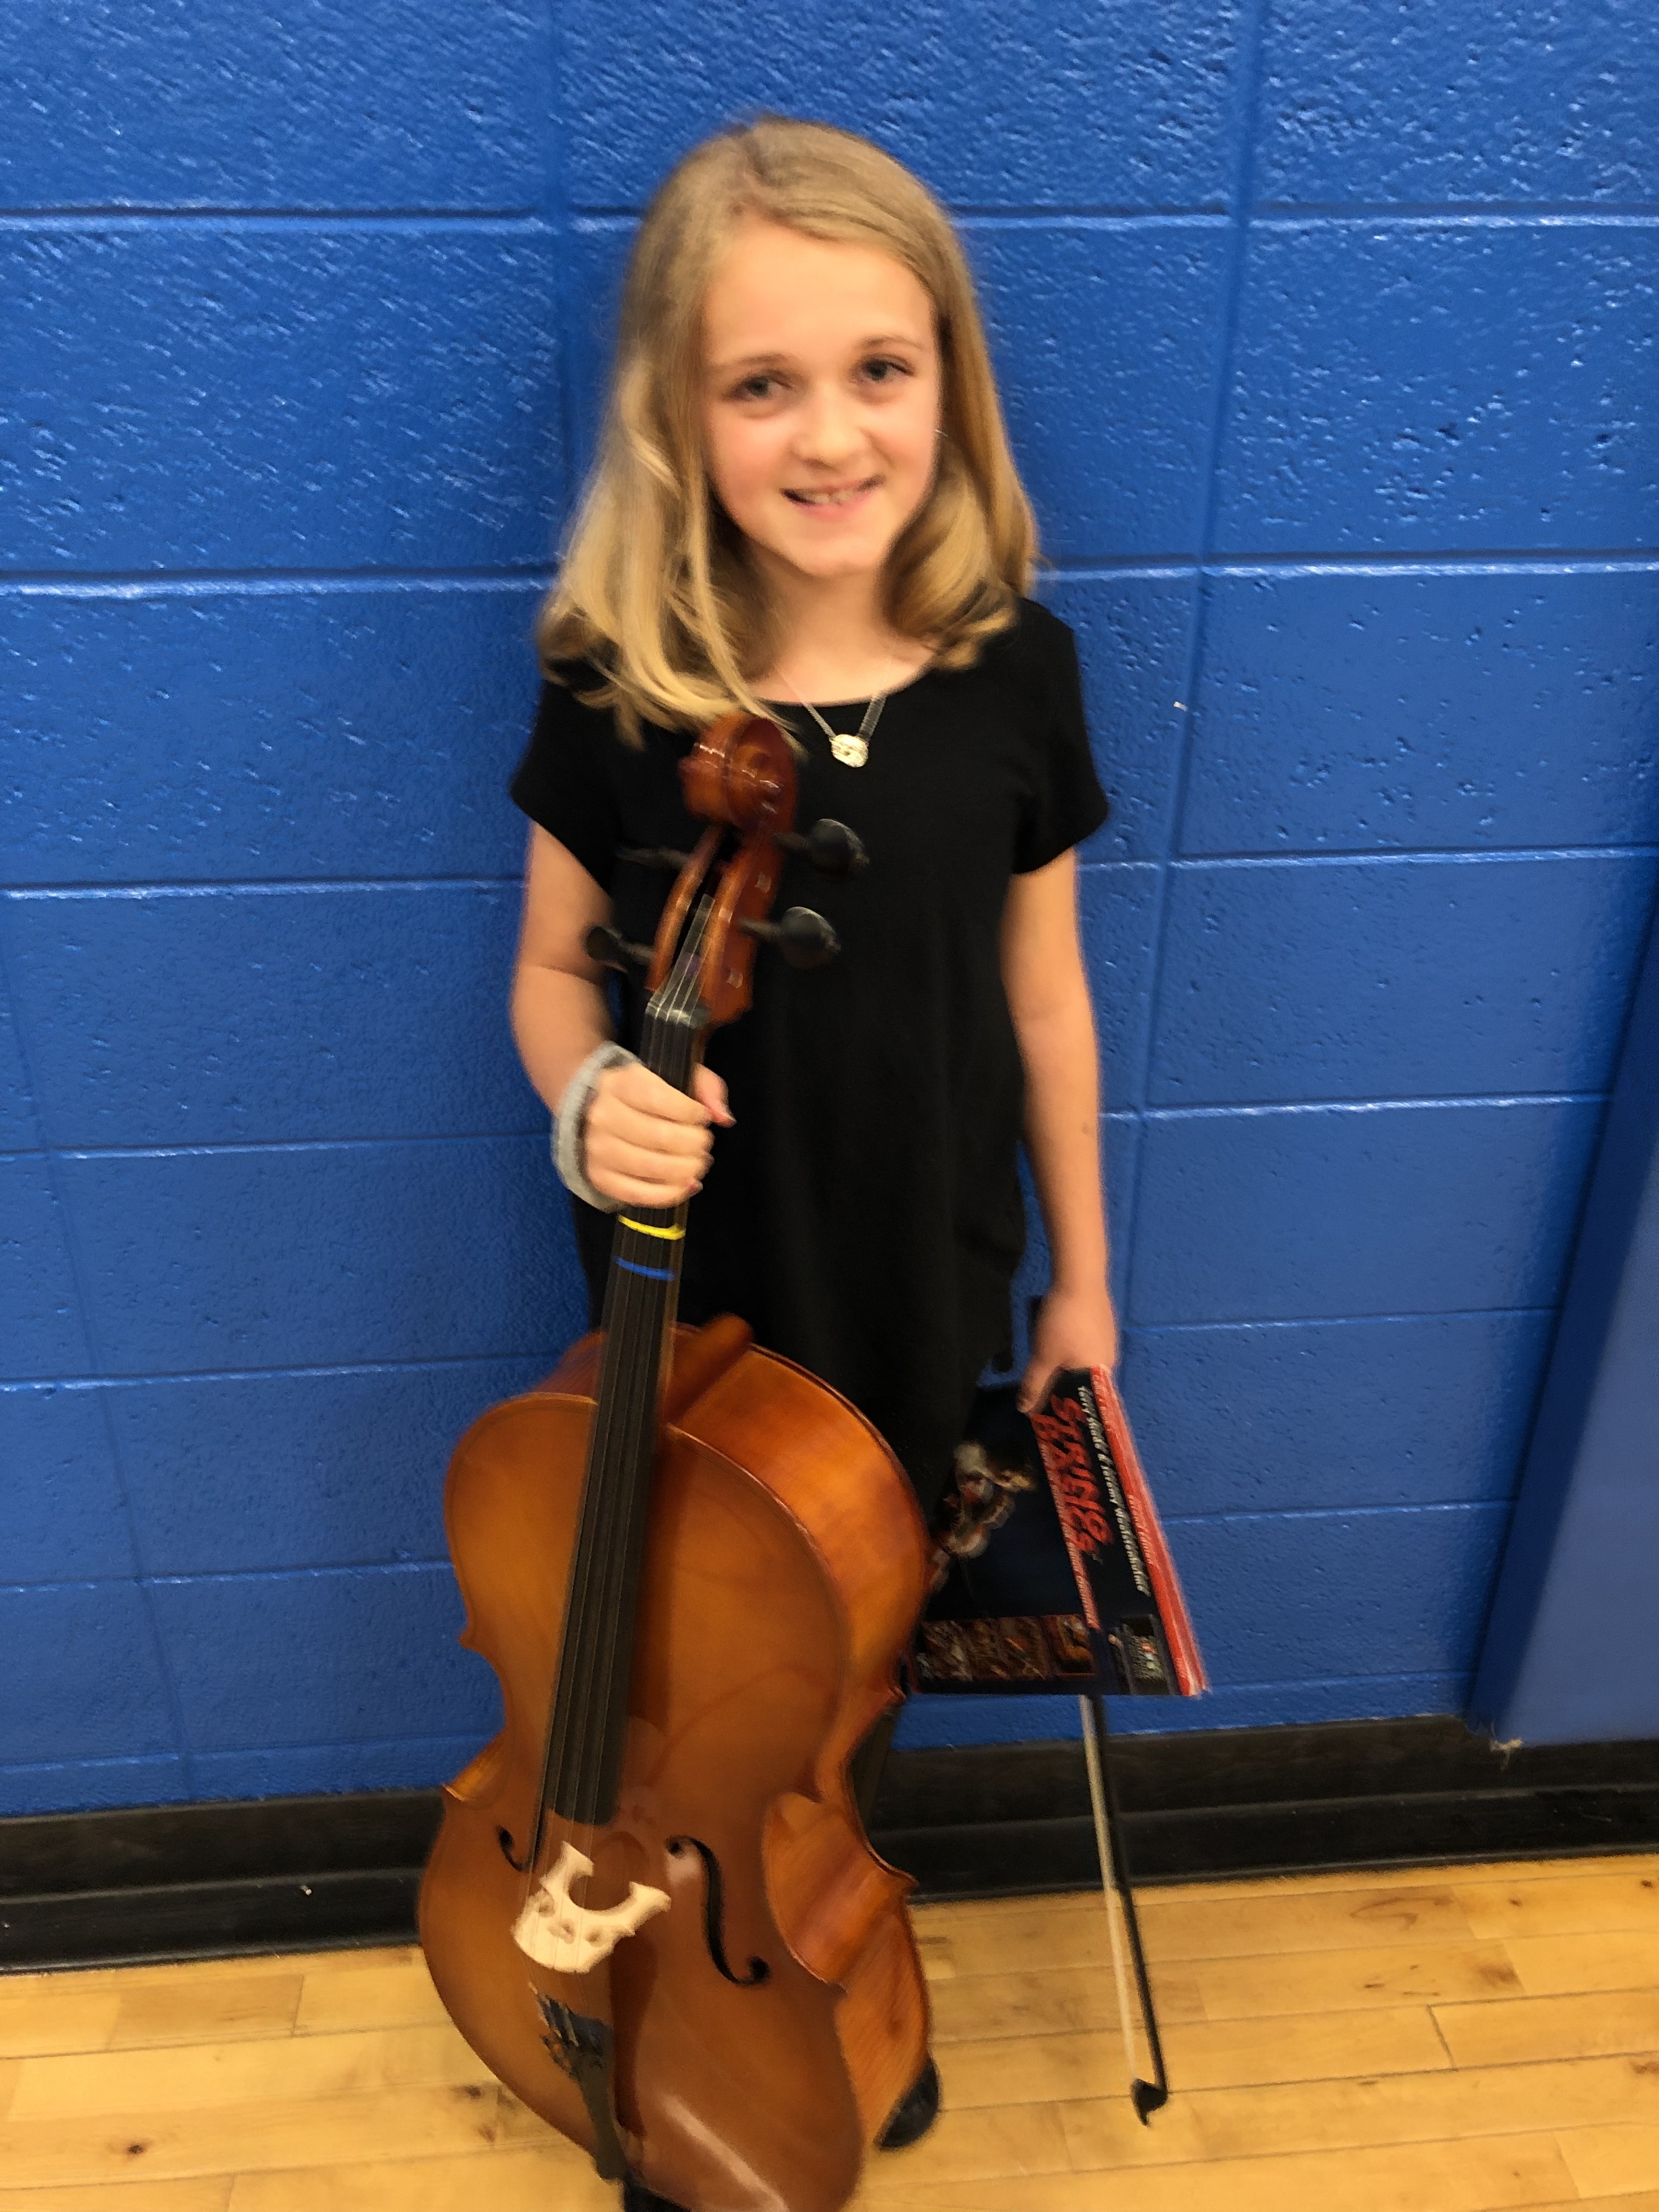 Lily and her cello